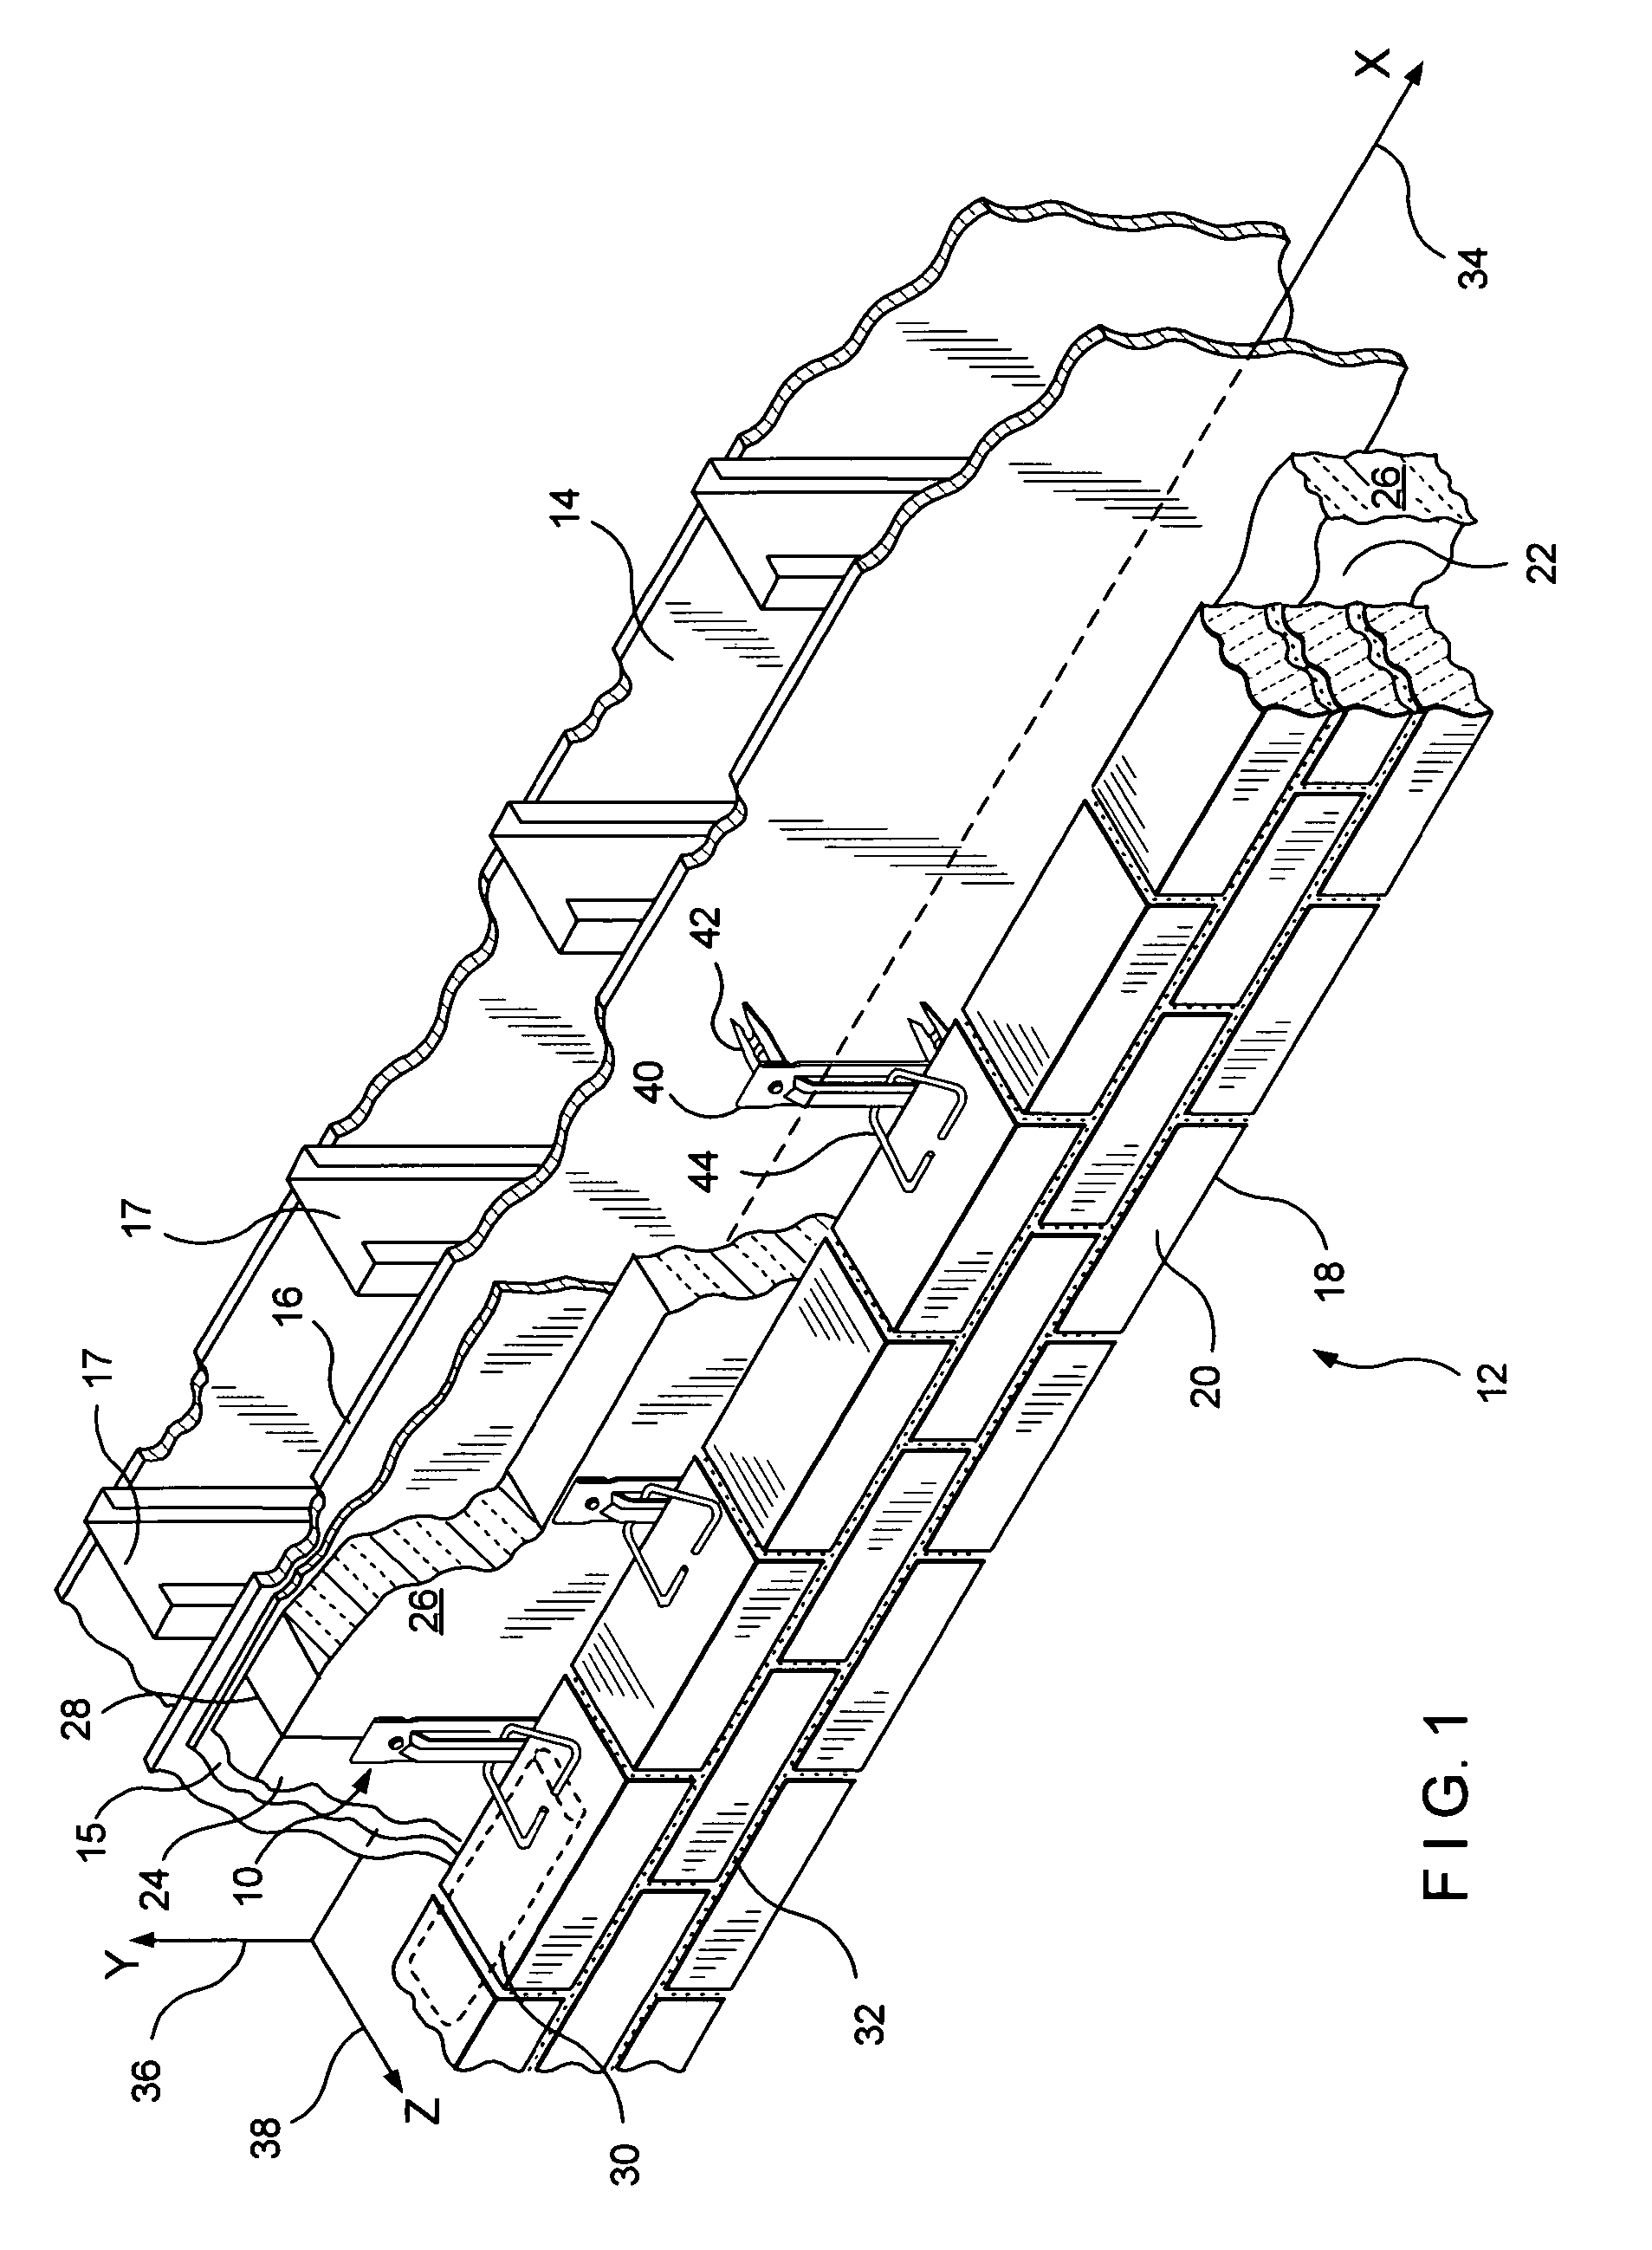 Notched surface-mounted anchors and wall anchor systems using the same